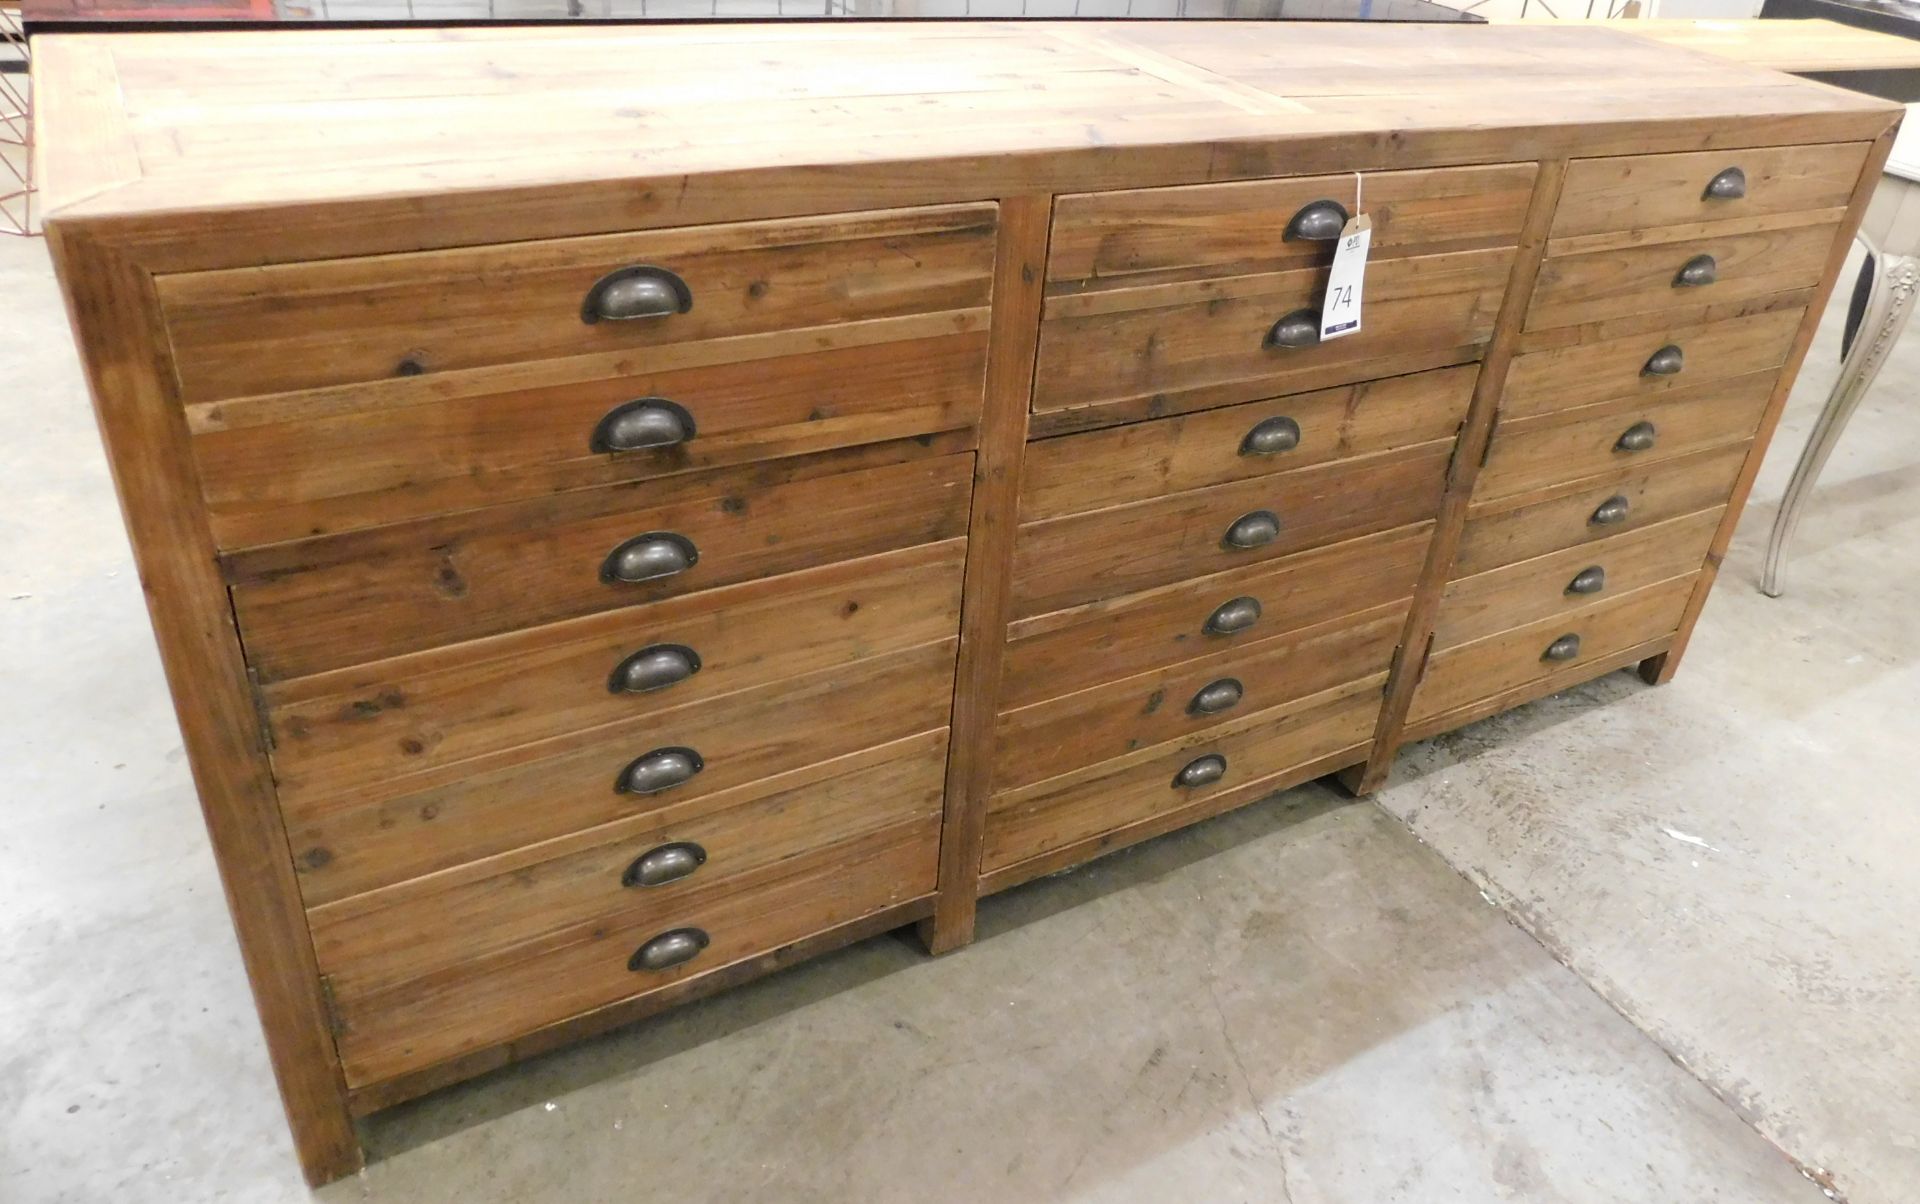 Coach House YUY Sideboard/Specimen Cabinet Fitted 3 Backs Each Of 7 Drawers With Inverted Cup